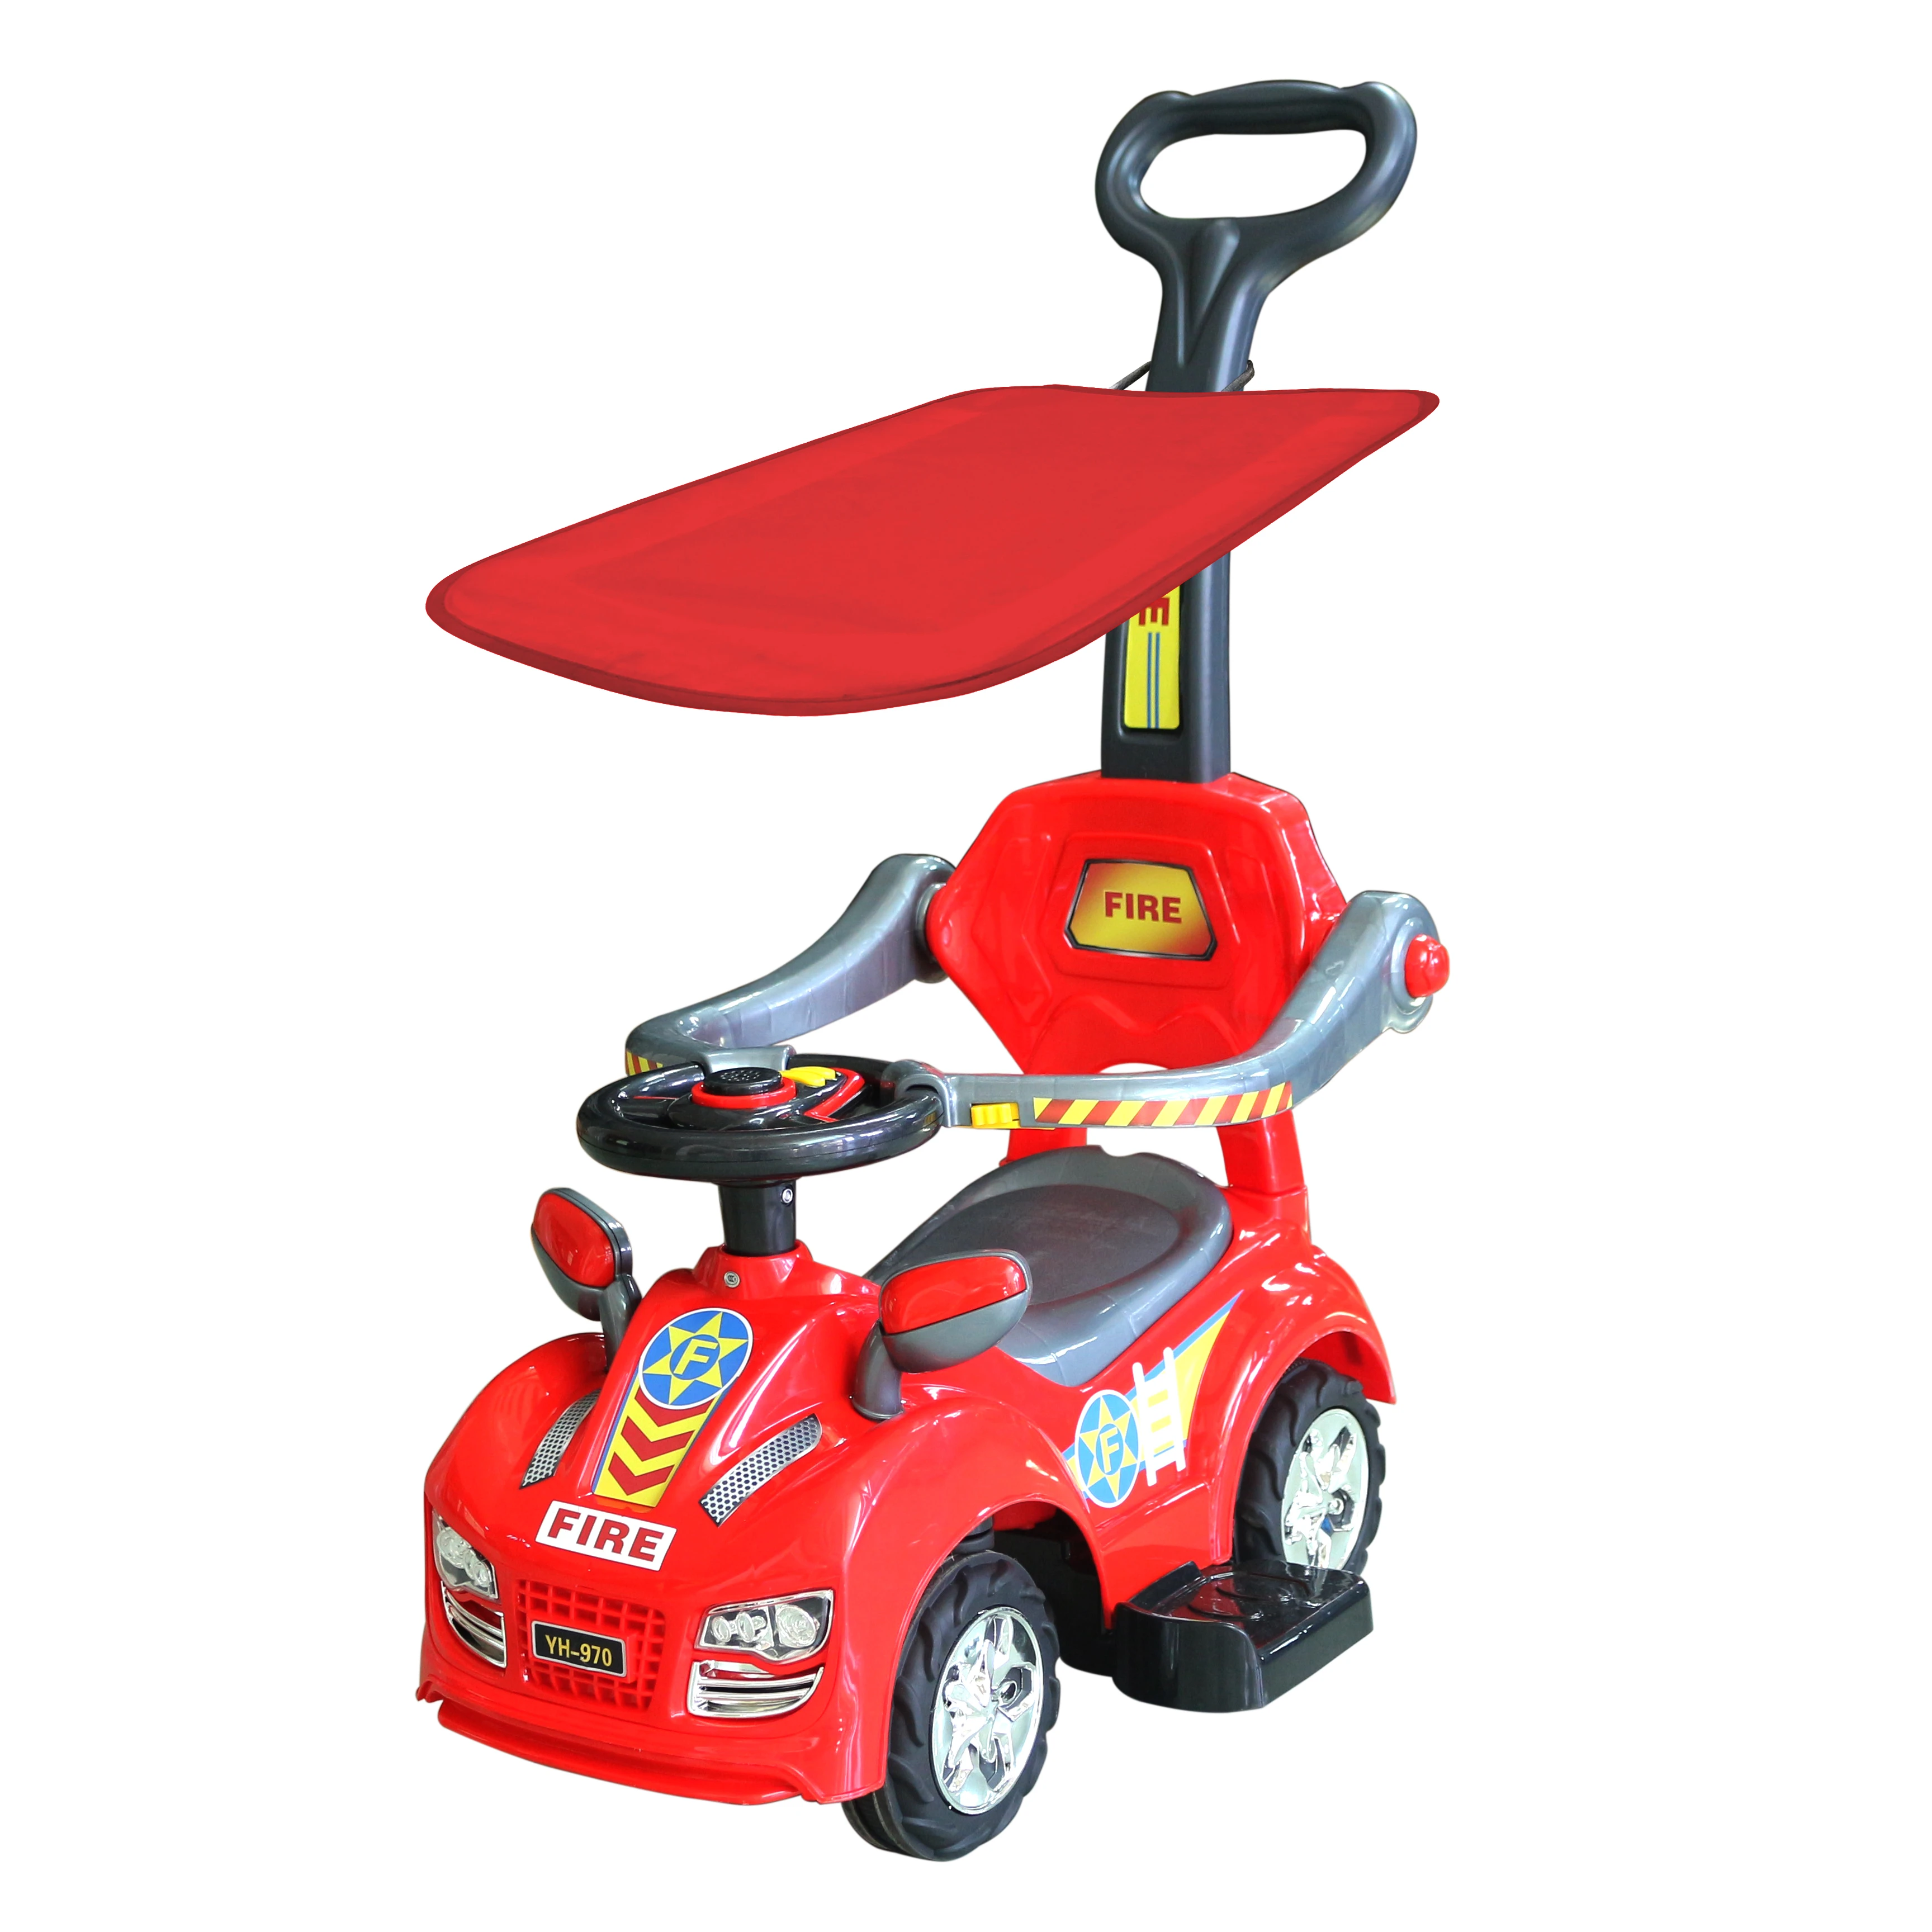 baby ride on toys with handle